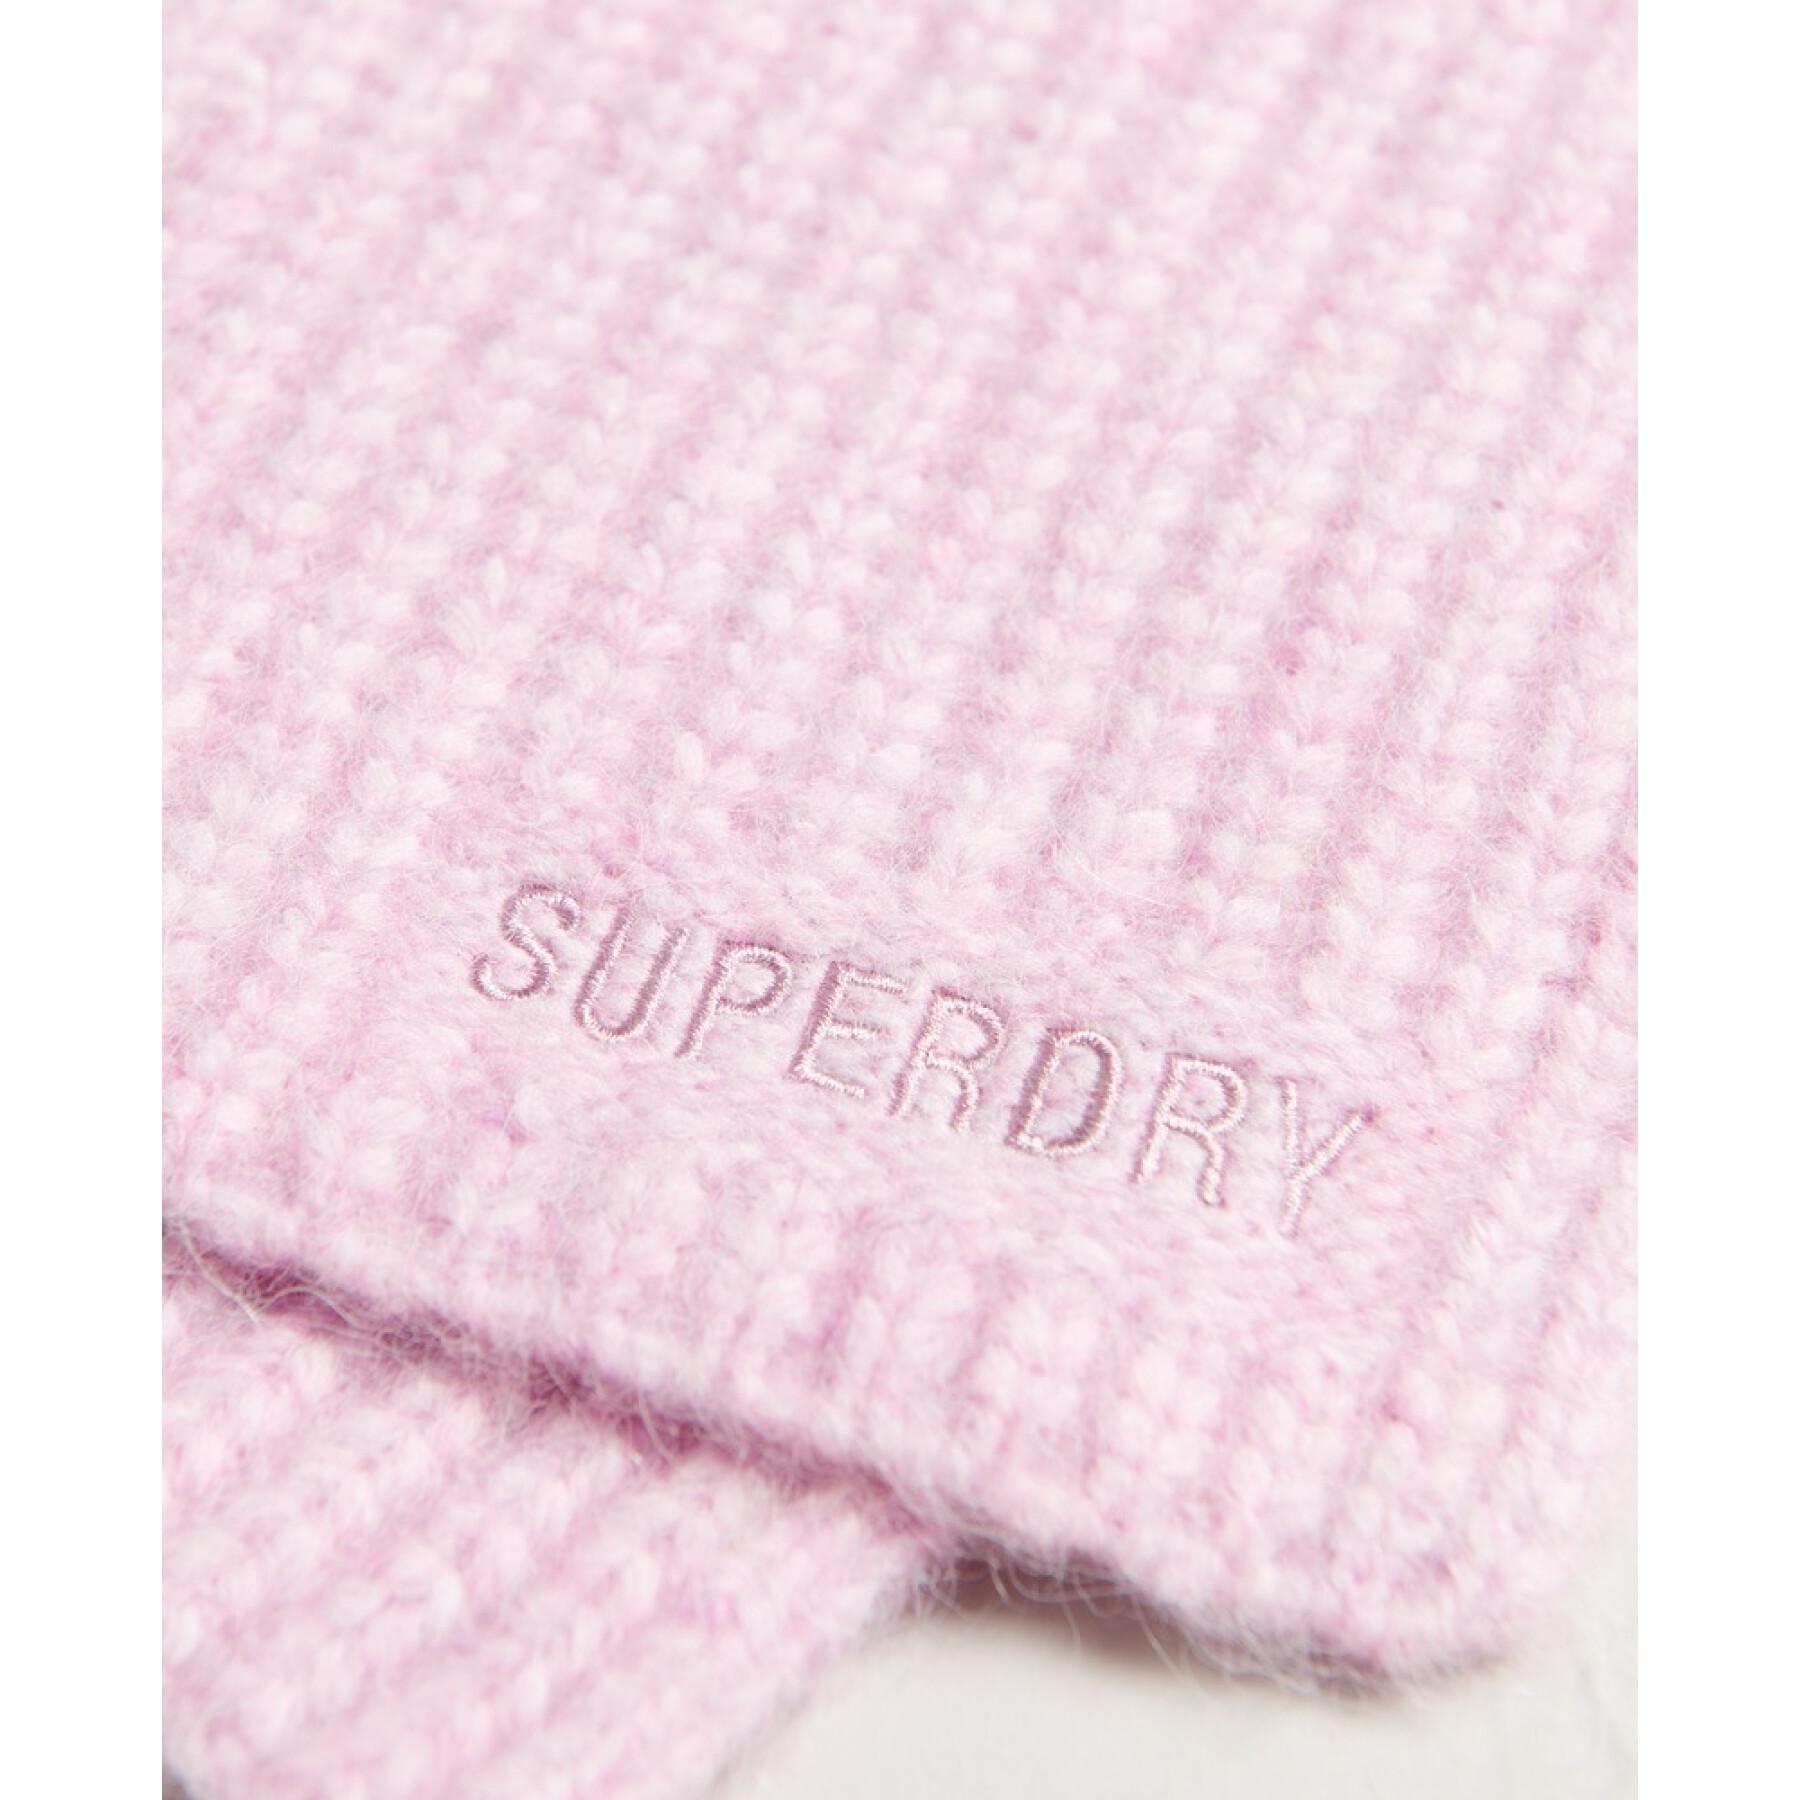 ribbed scarf Superdry Essential